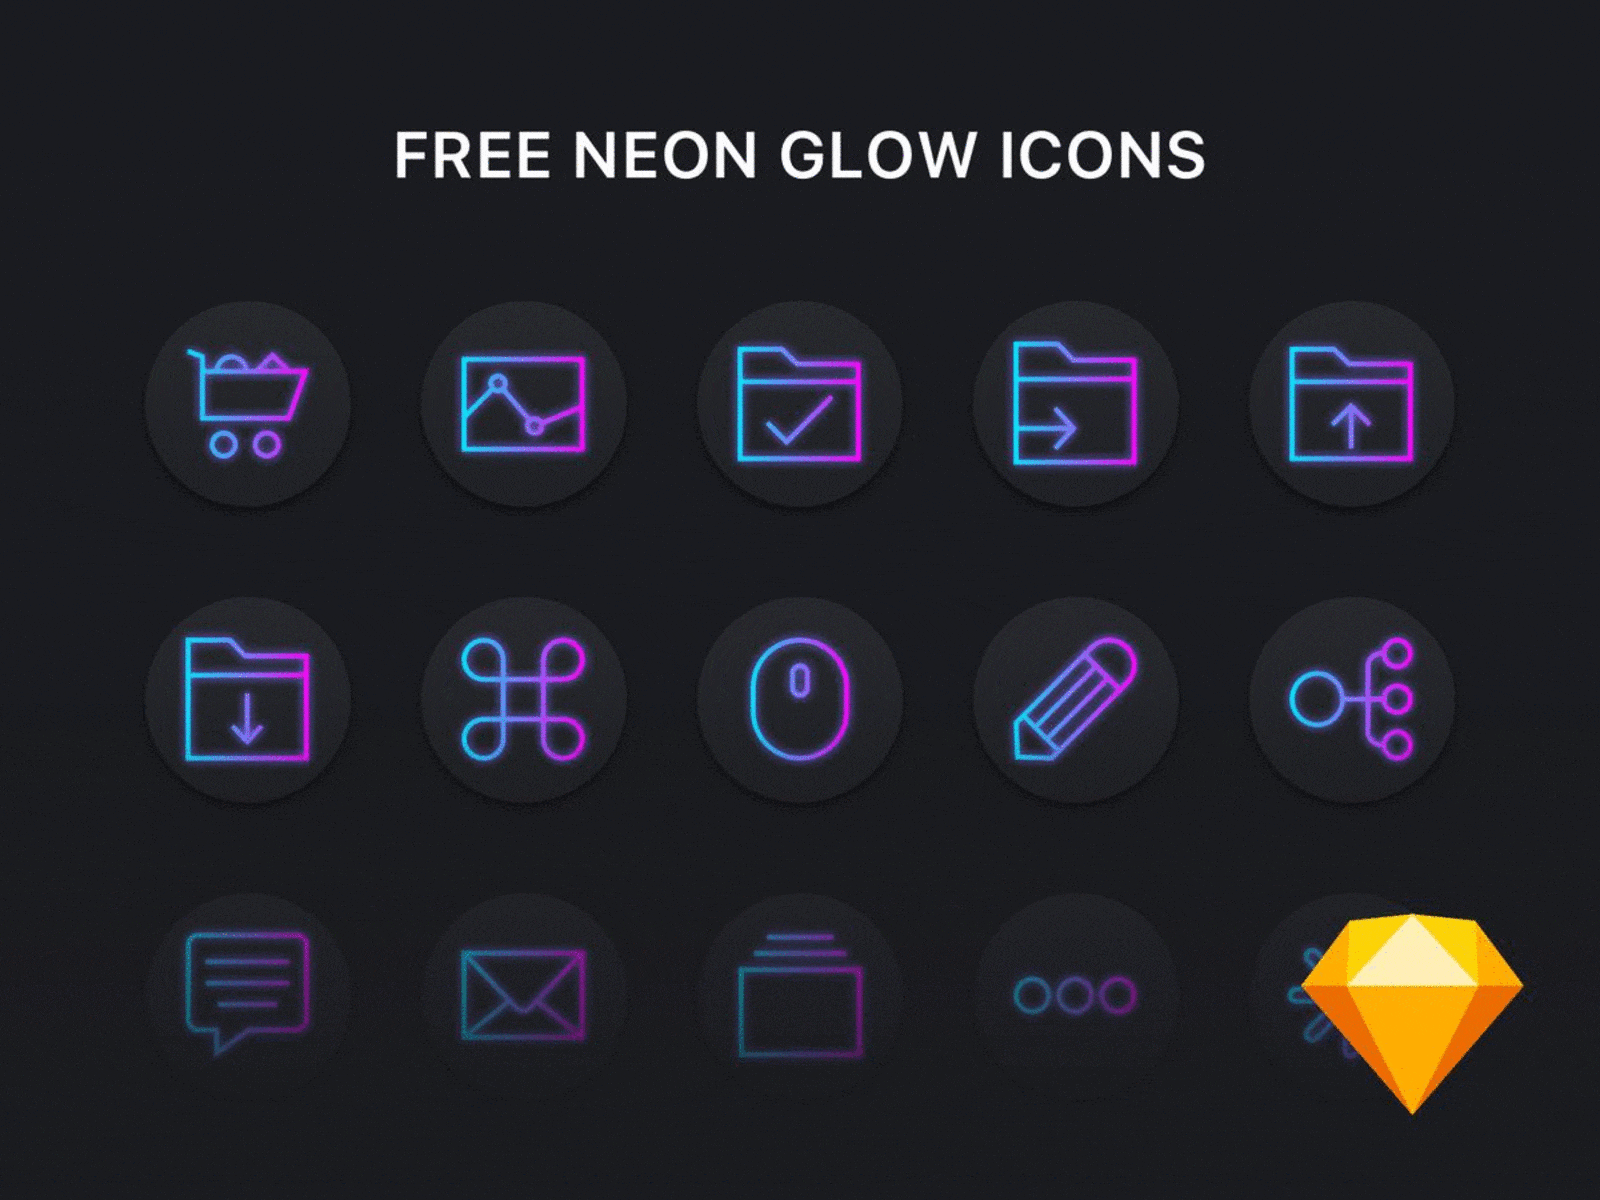 FREE NEON GLOW ICONS SET adobe xd app interaction cool icons dribbble best shot free icons freebie glow icons icon icon design icon set iconography icons icons design icons download icons glowing icons pack iconset neon icons ui design